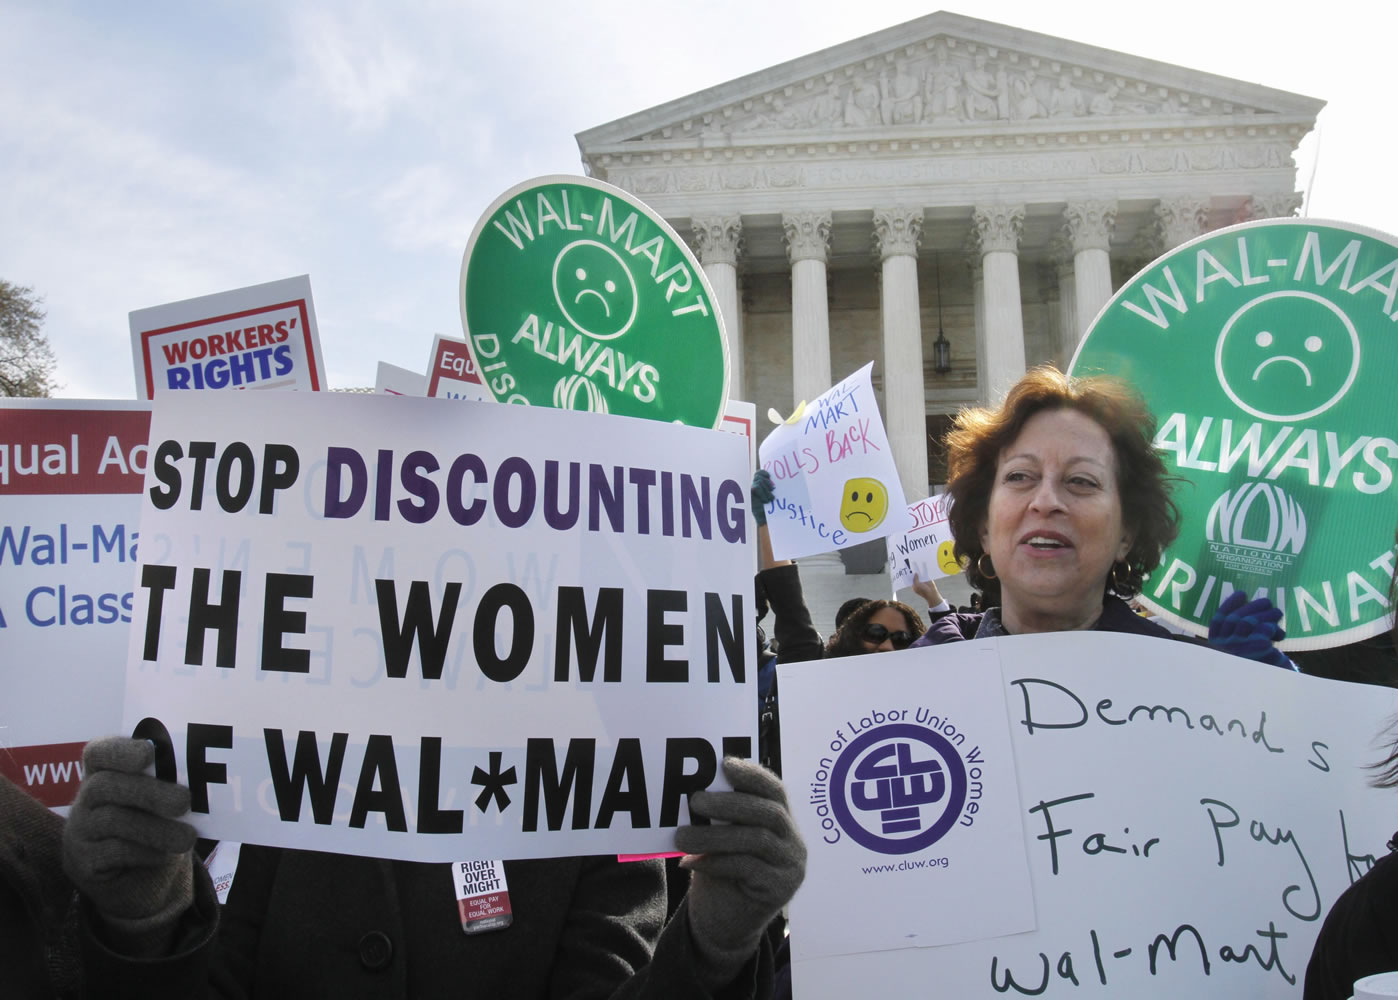 Carol Rosenblatt of Washington, right, and others take part in a rally outside the Supreme Court in Washington, D.C., in March in support of the plaintiffs in a case of women employees against Wal-Mart.